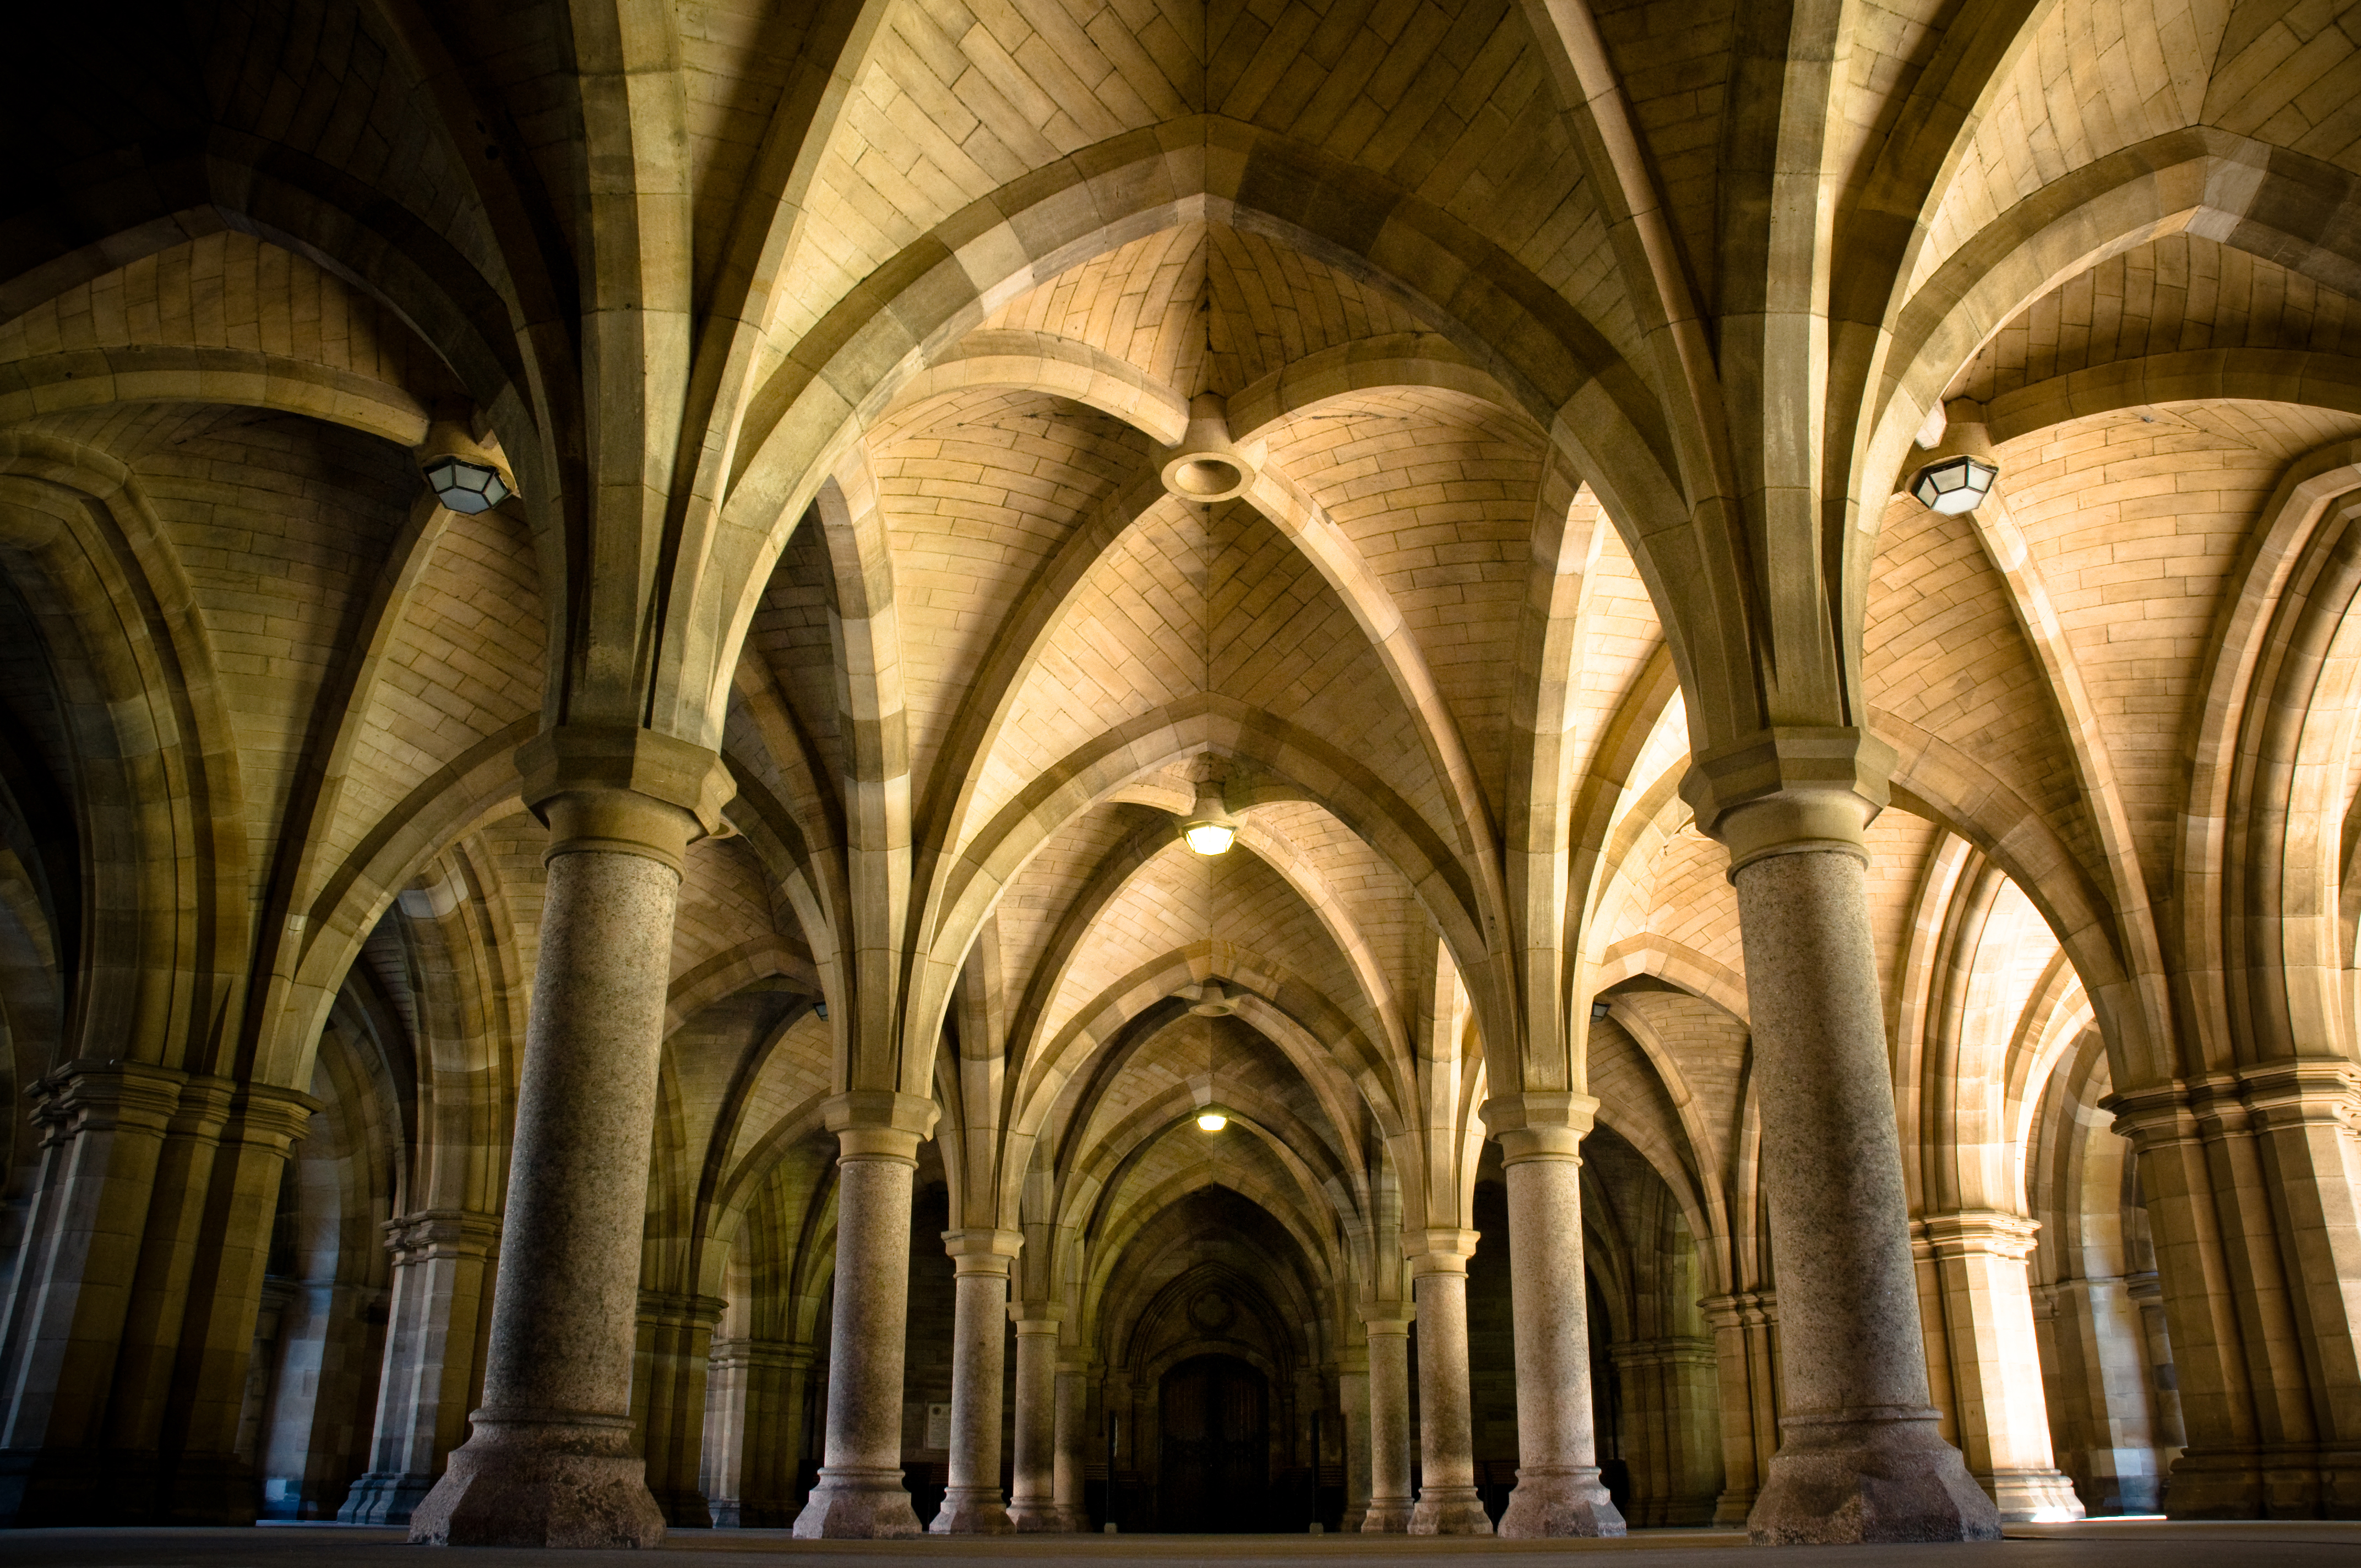 The cloisters inside the main building.